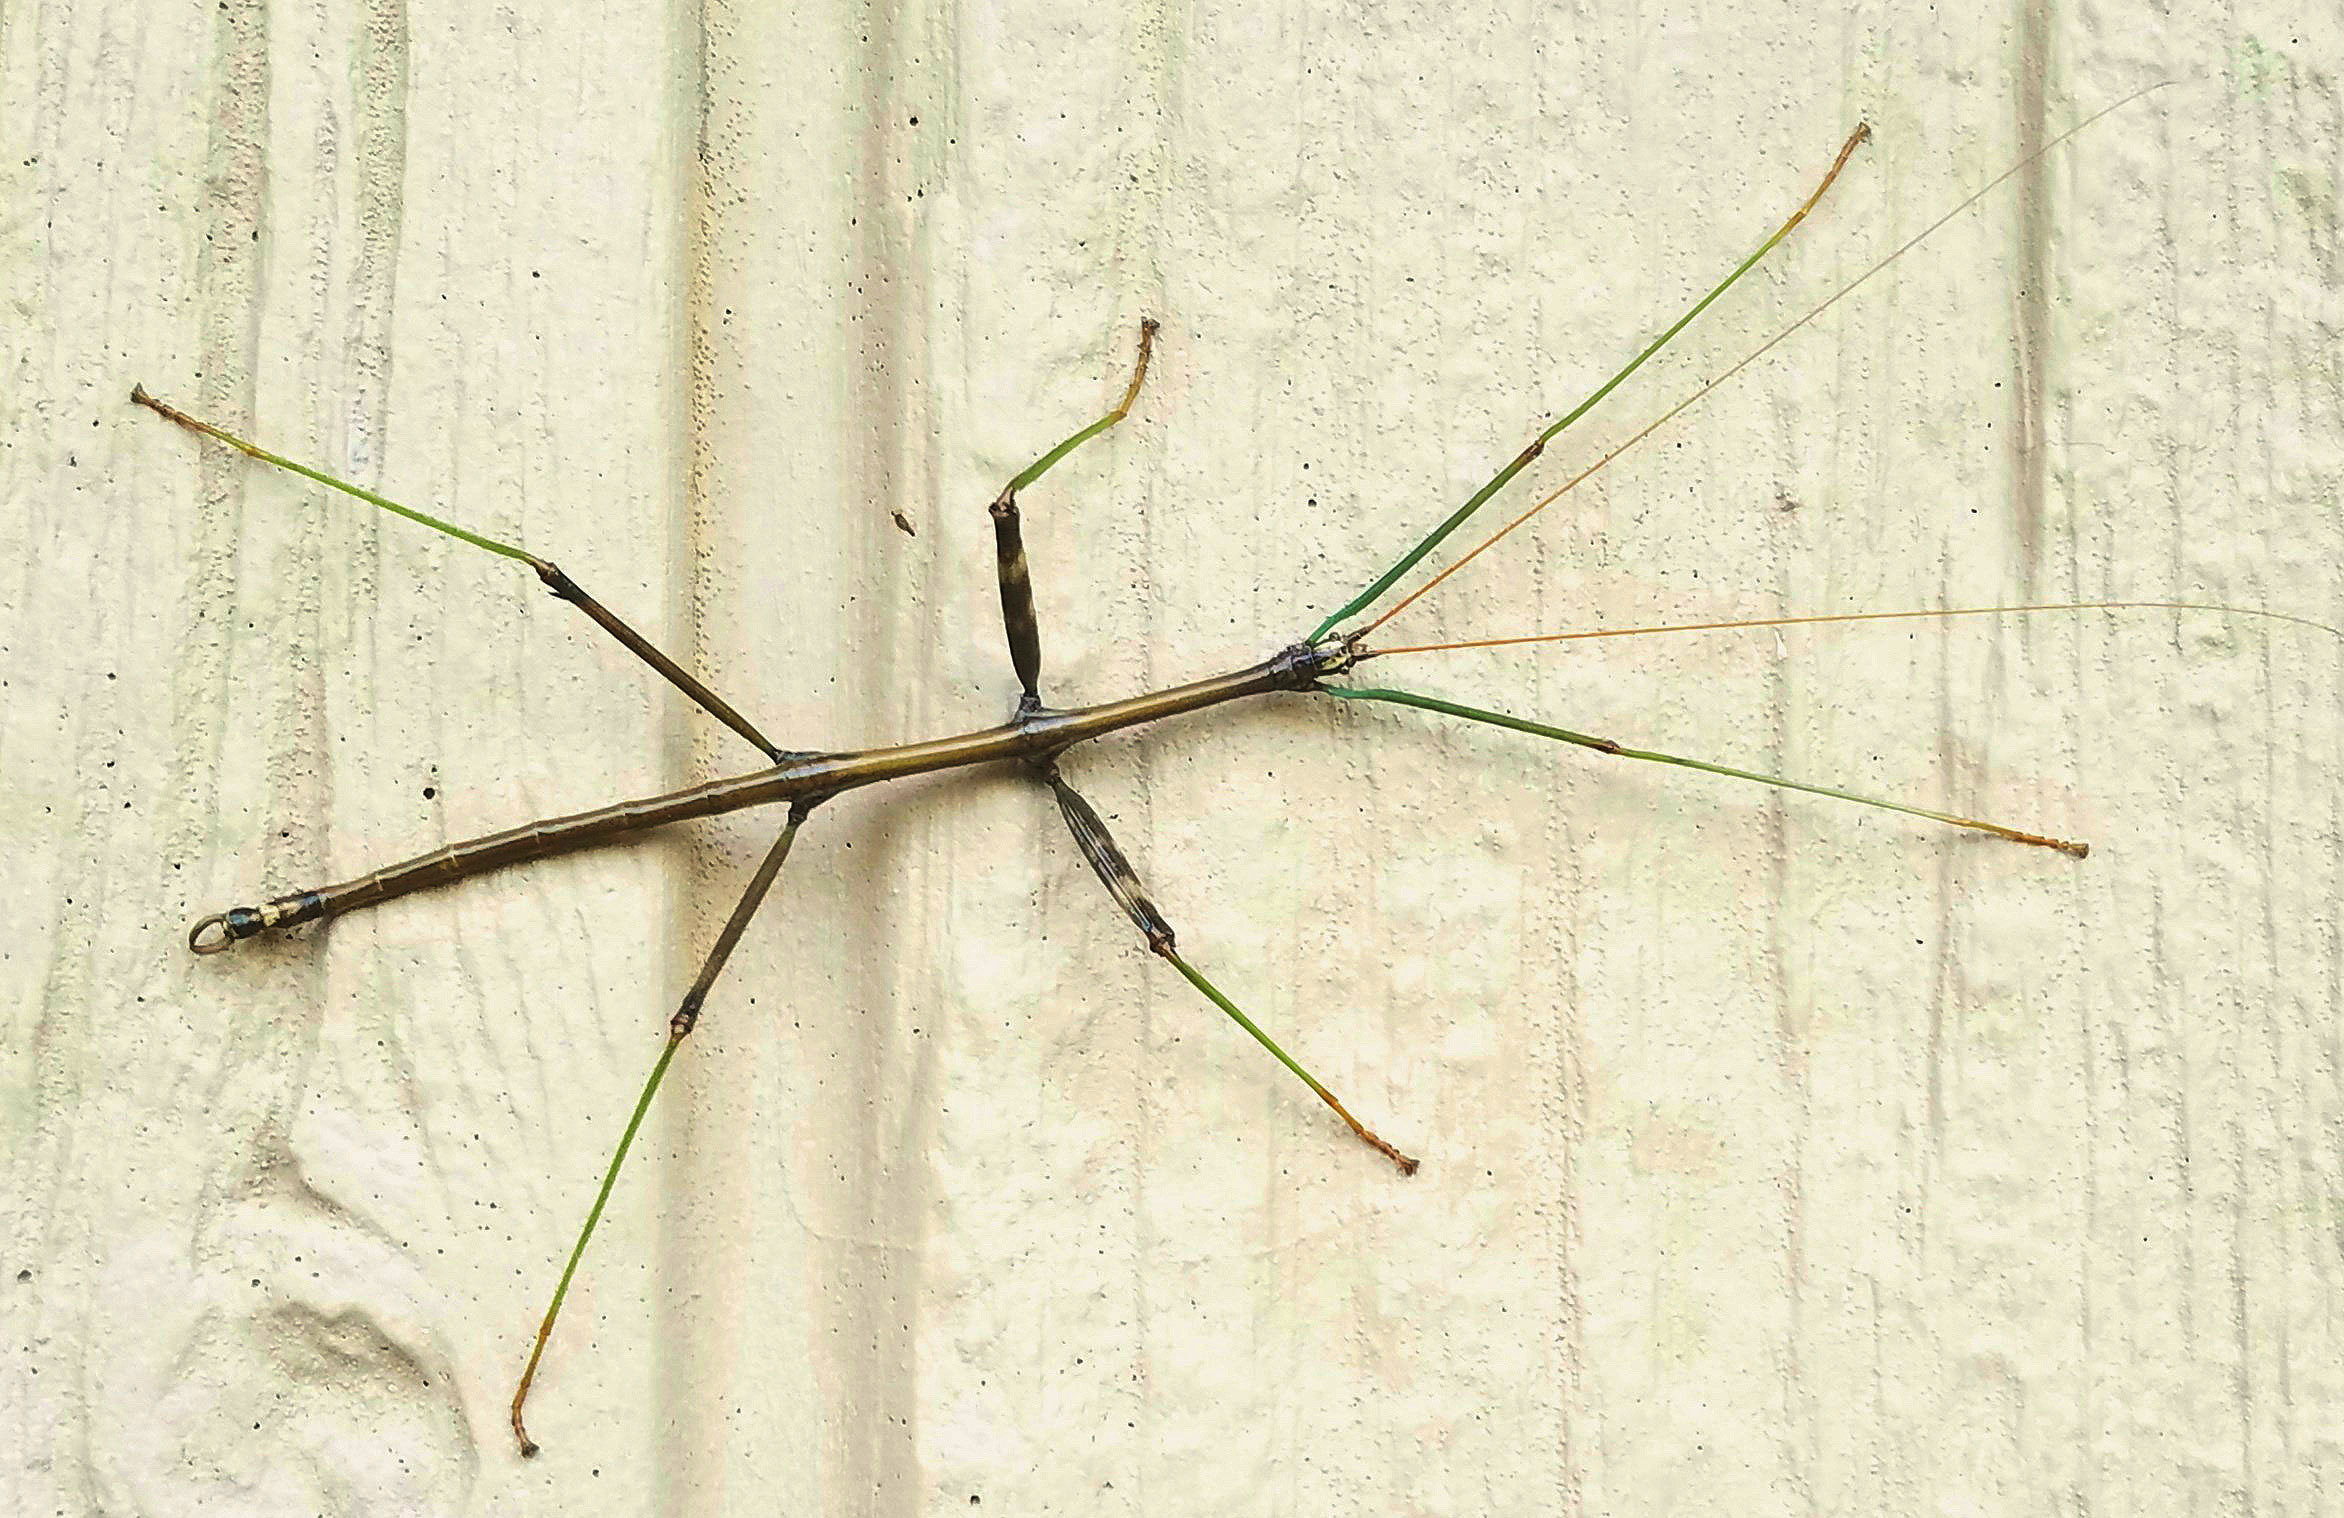 A walking stick on a wooden structure.